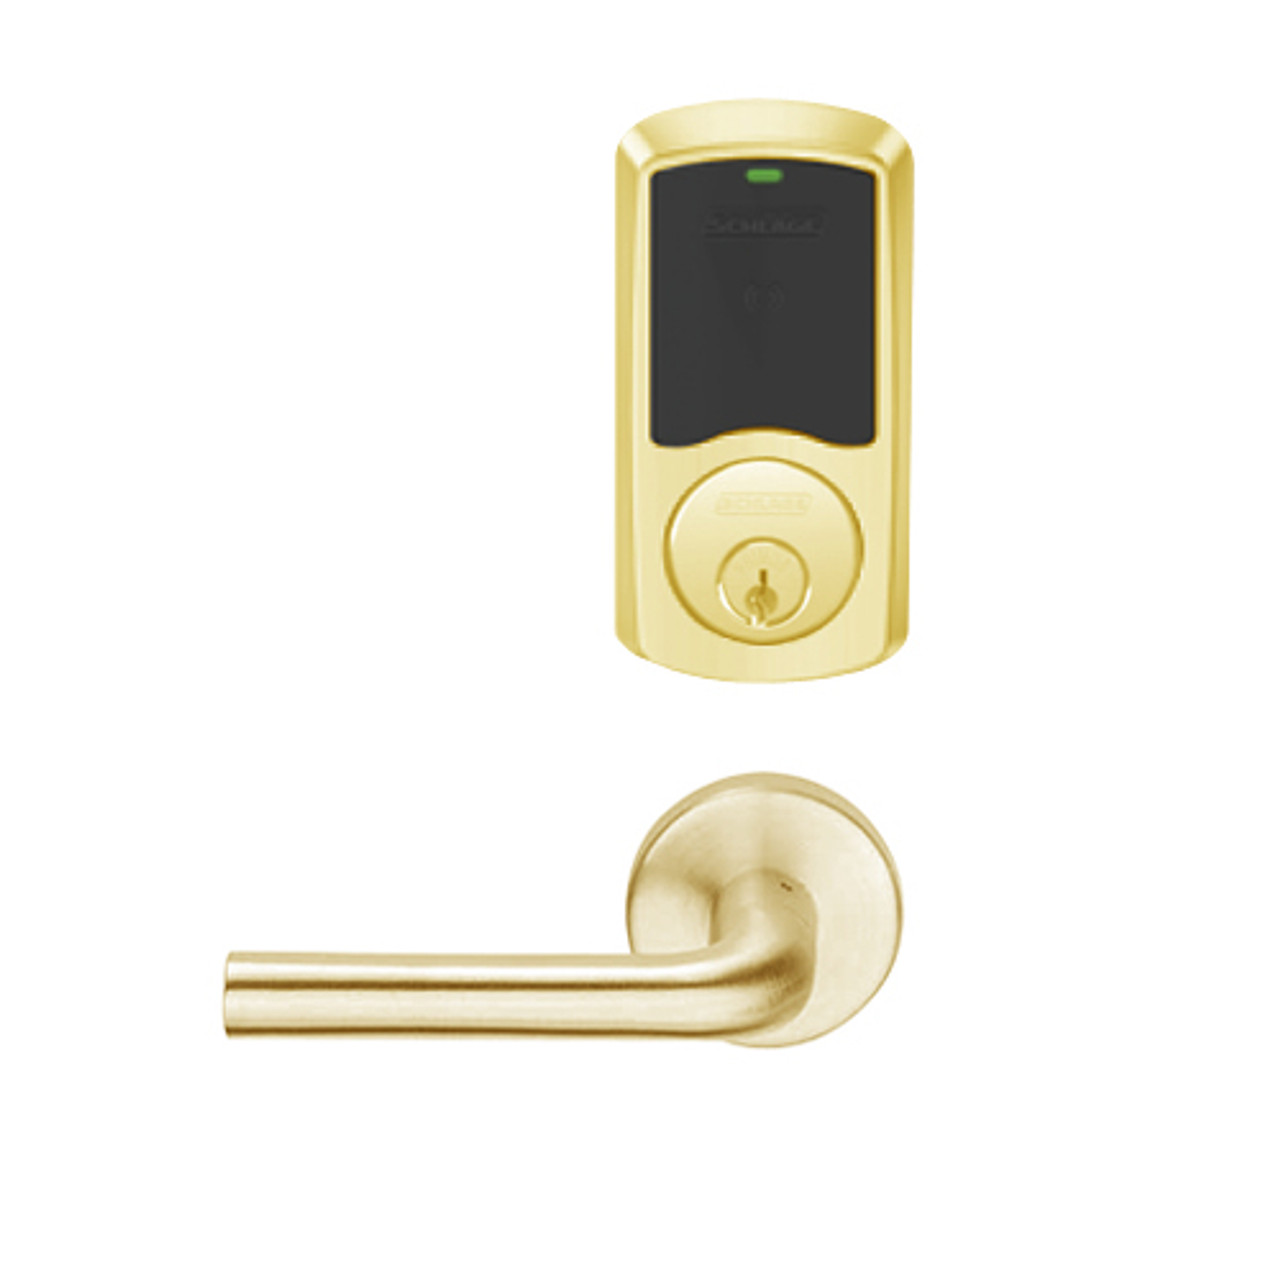 LEMB-GRW-P-02-605-00C Schlage Privacy/Office Wireless Greenwich Mortise Lock with Push Button & LED Indicator and 02 Lever in Bright Brass